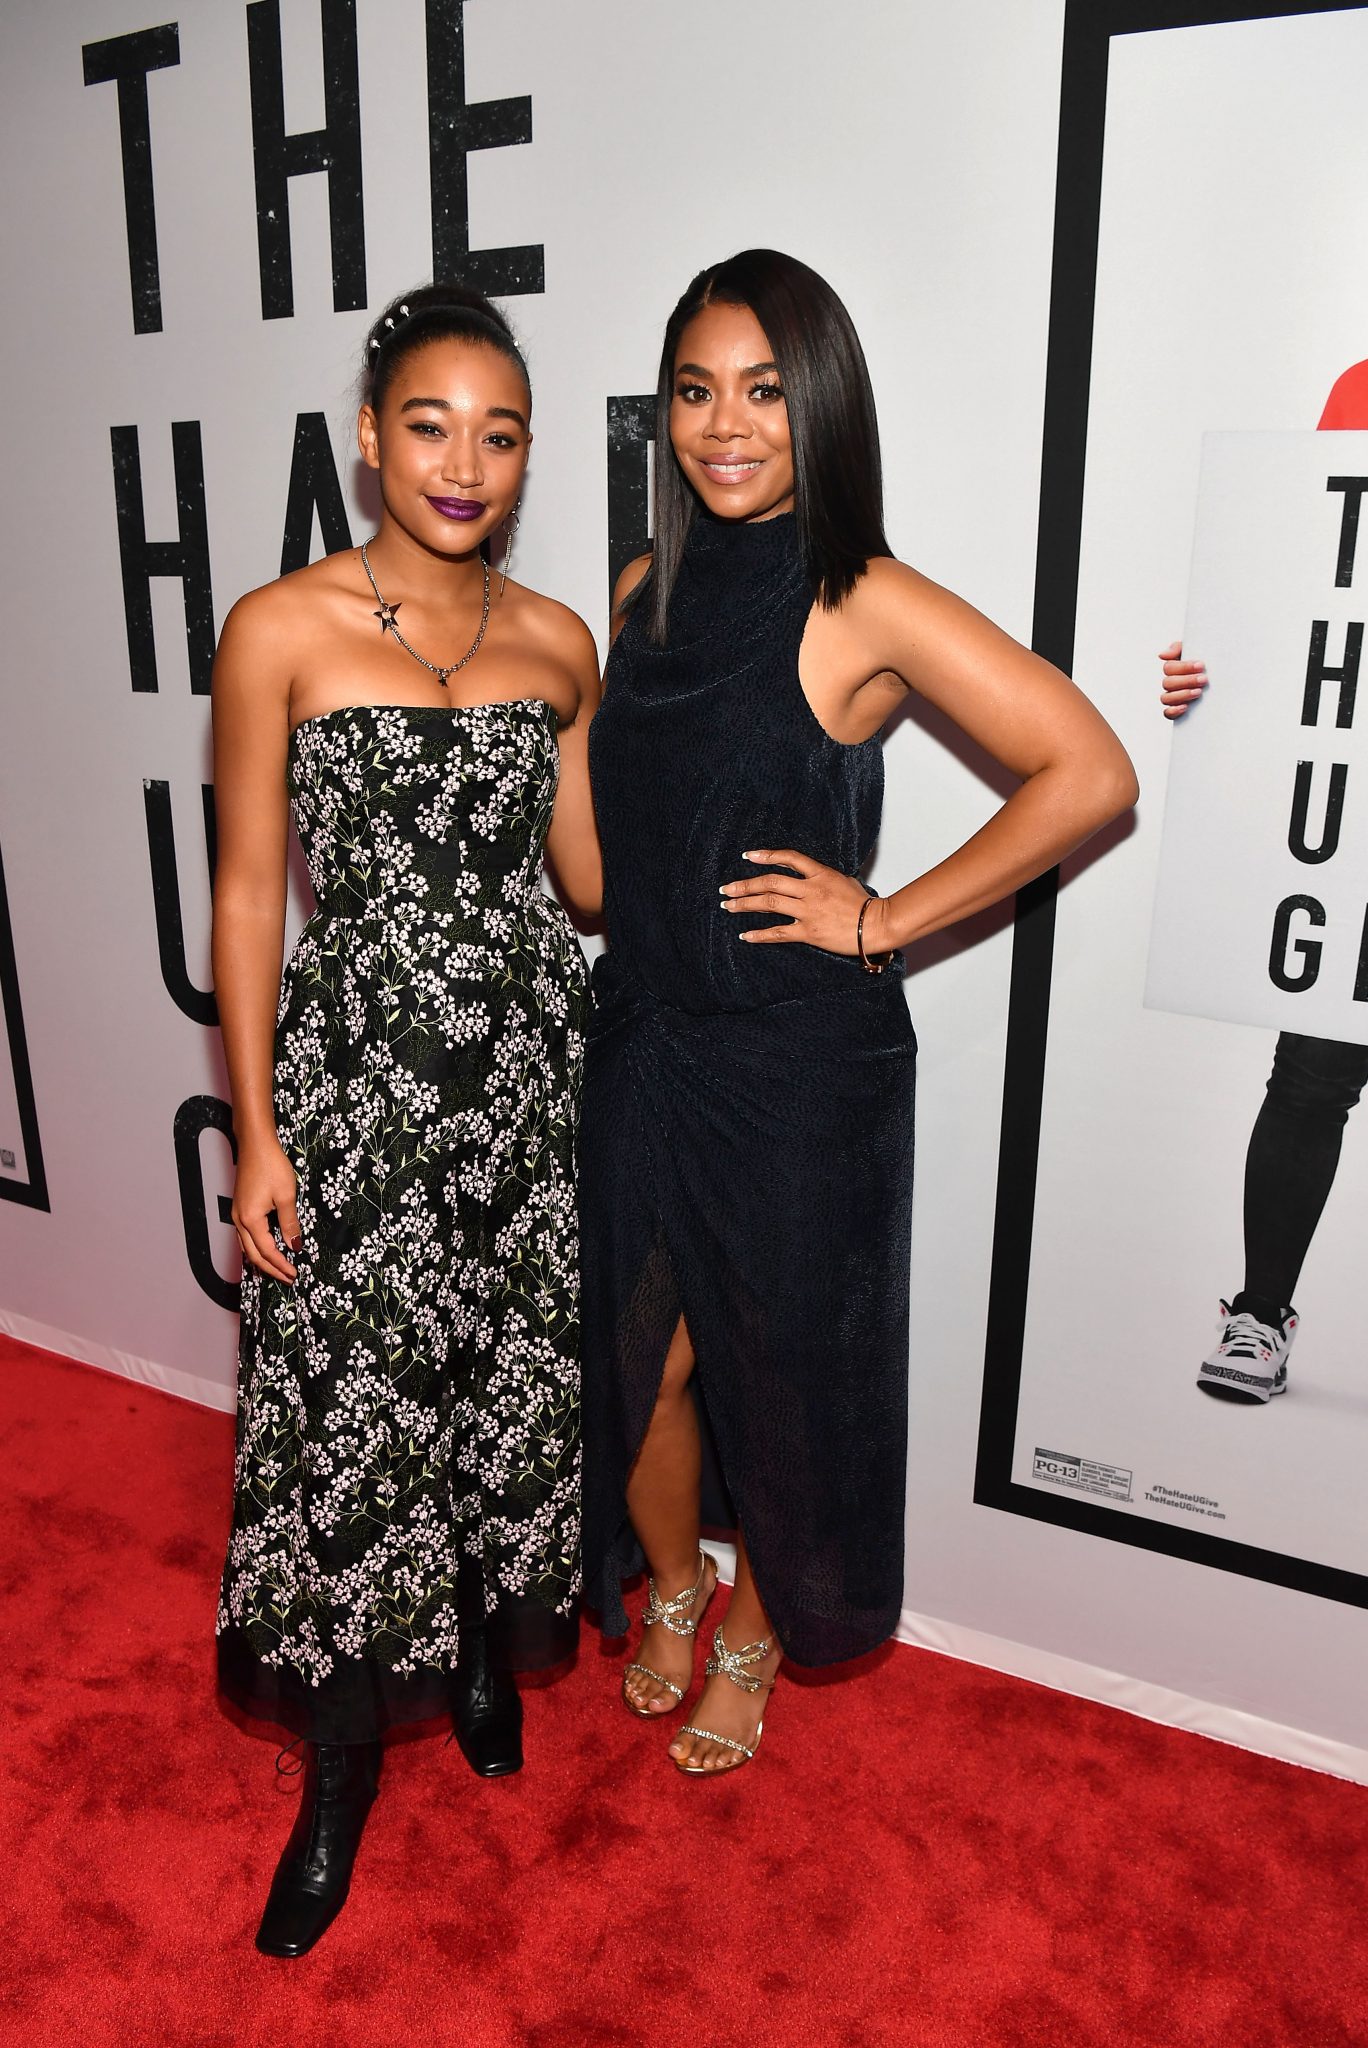 the hate you give premiere